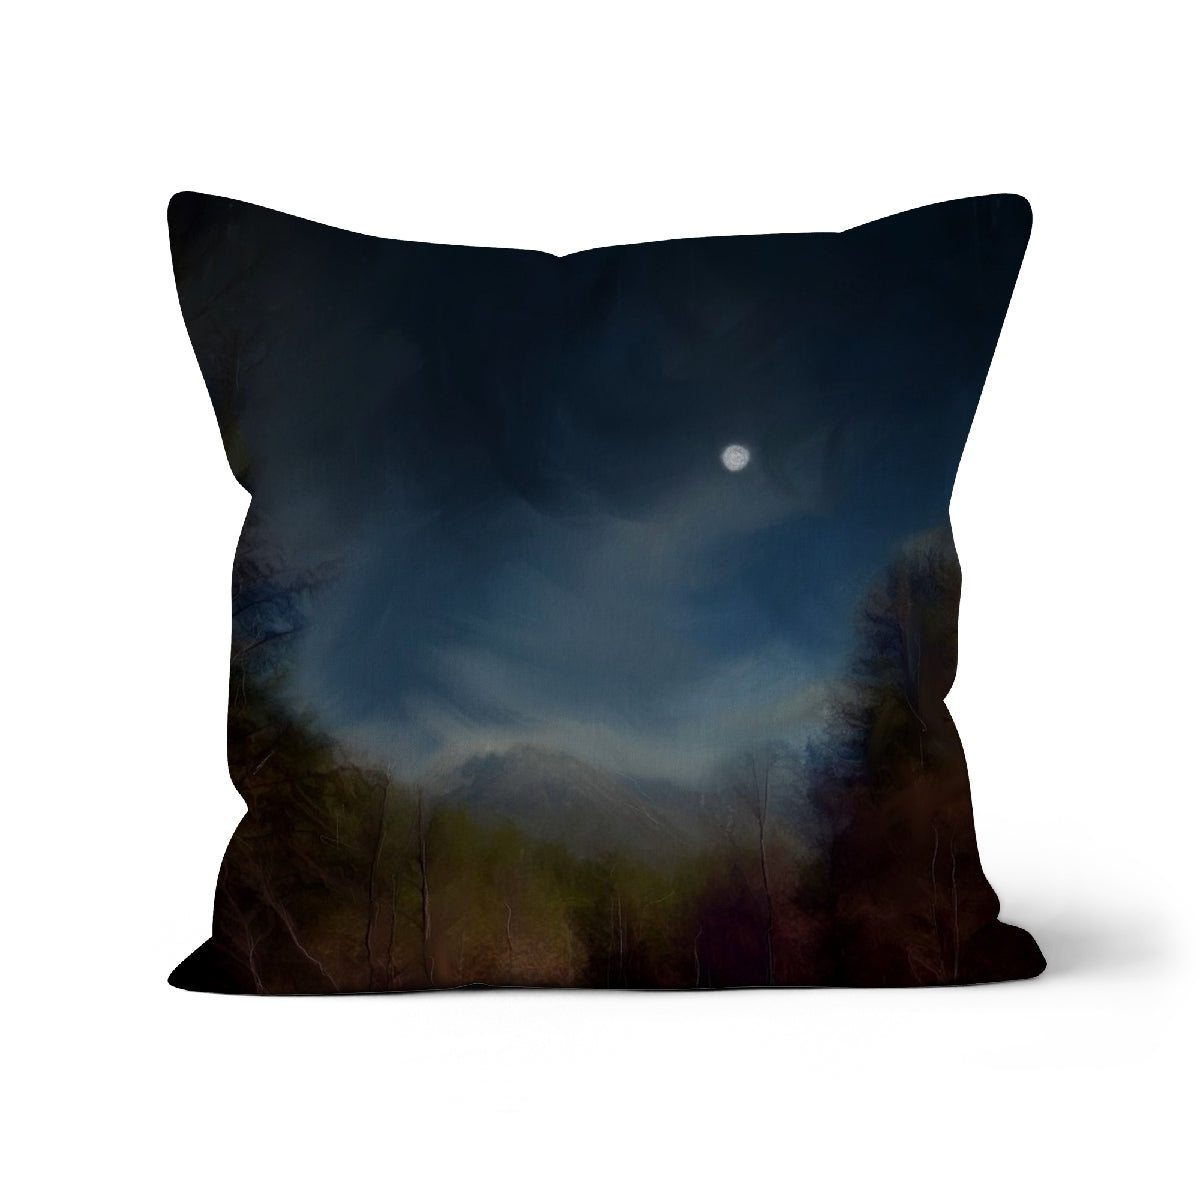 Glencoe Lochan Moonlight Art Gifts Cushion-Cushions-Scottish Lochs & Mountains Art Gallery-Faux Suede-22"x22"-Paintings, Prints, Homeware, Art Gifts From Scotland By Scottish Artist Kevin Hunter